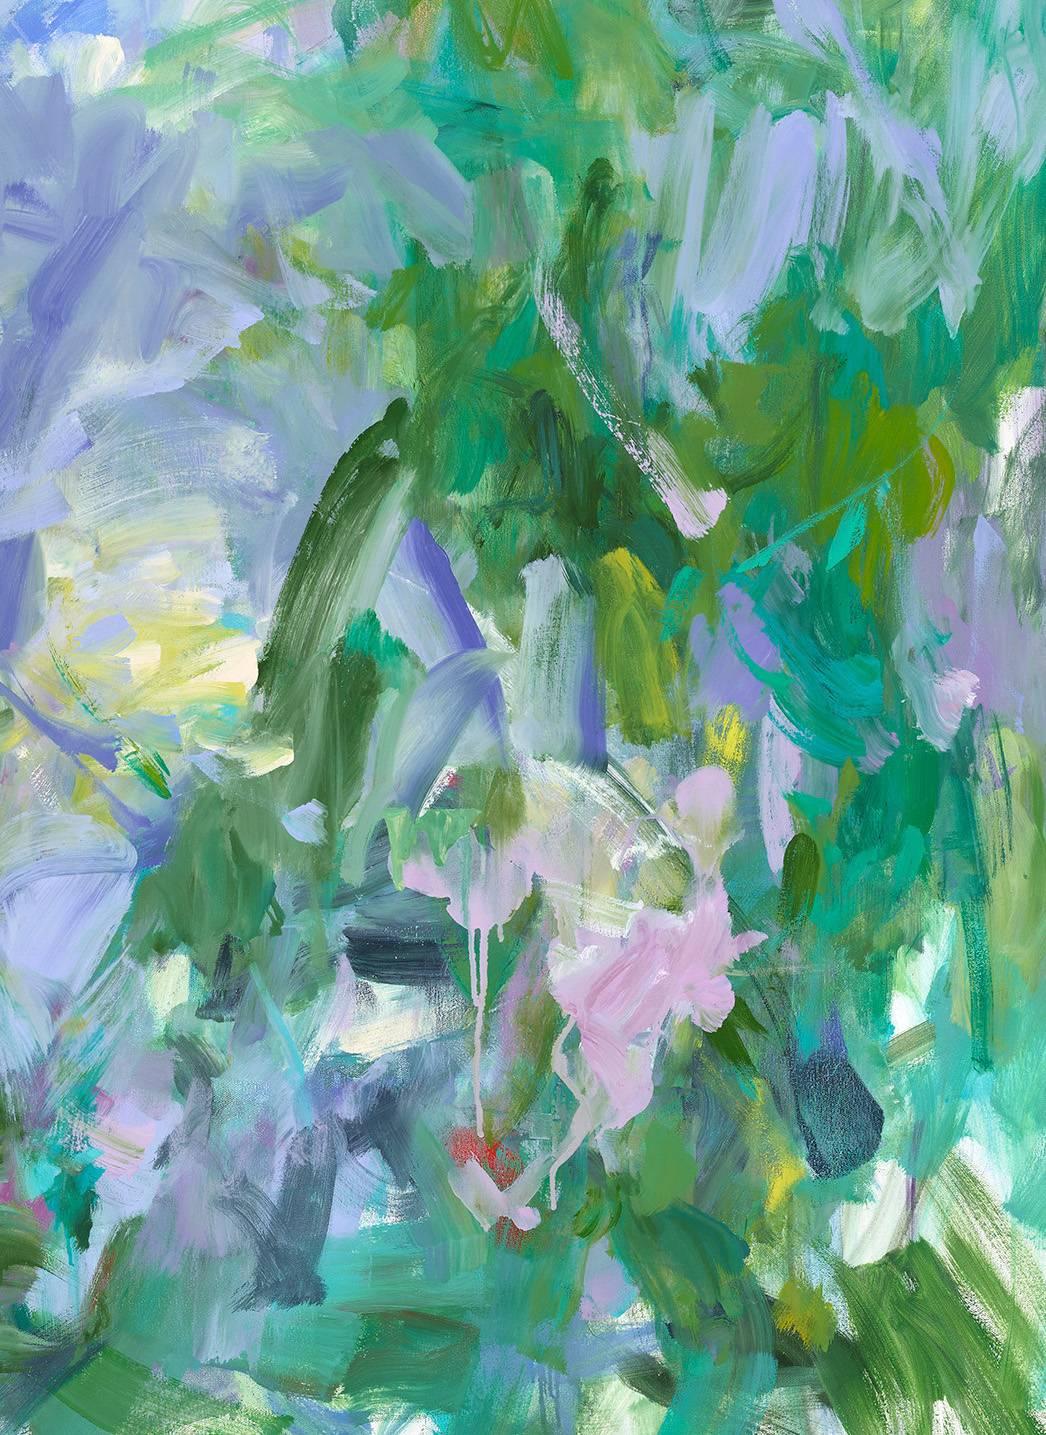 Yolanda Sánchez's A Verdant Heart is a beautiful abstract oil painting. Within its square dimensions shades of blue, green, and purple are used alluding to a rich green garden space. 

Sánchez's paintings are a search for re-enchantment, for a way